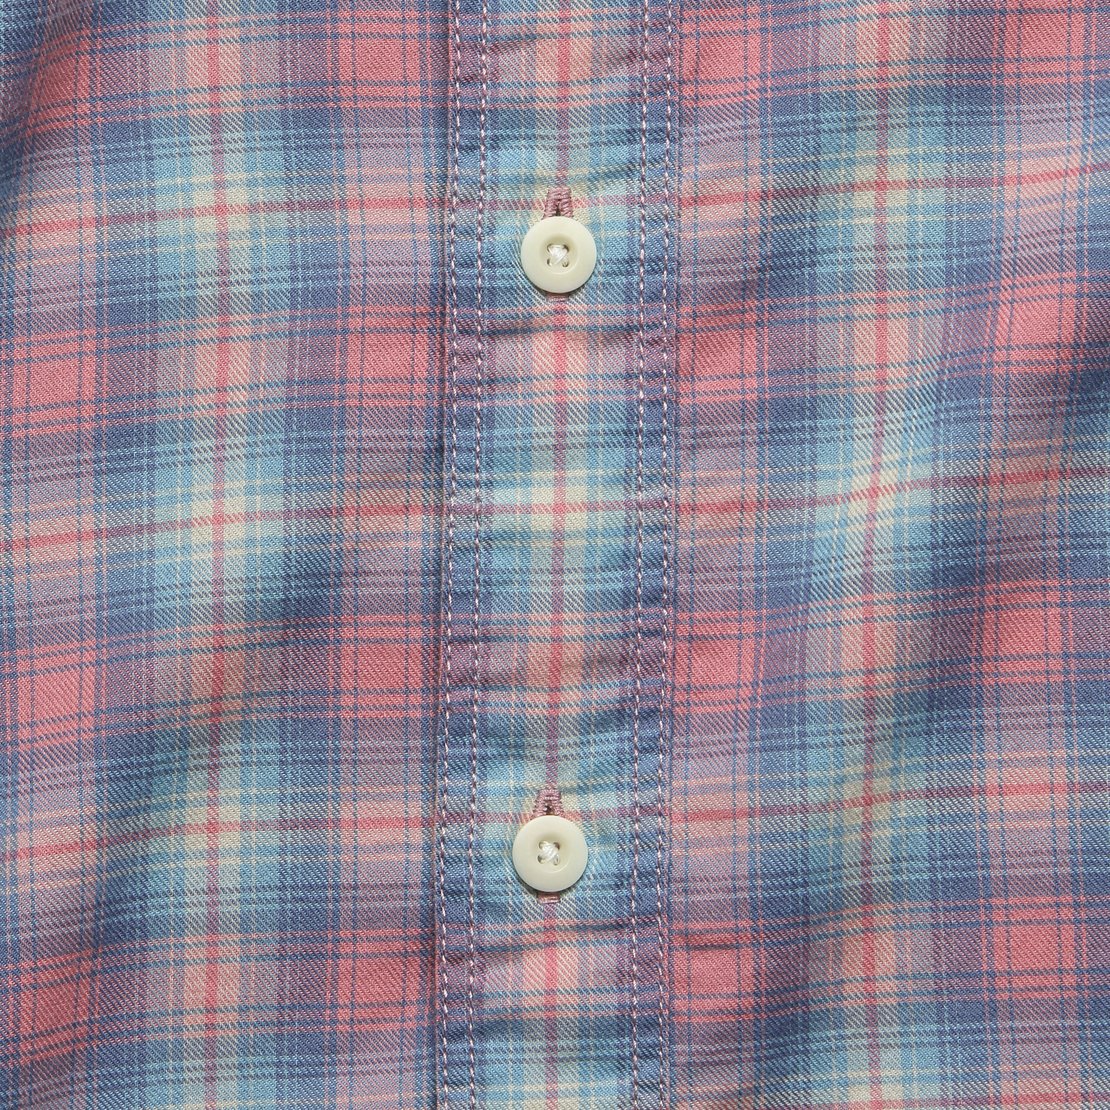 Everyday Shirt - Summerland Plaid - Faherty - STAG Provisions - Tops - L/S Woven - Plaid